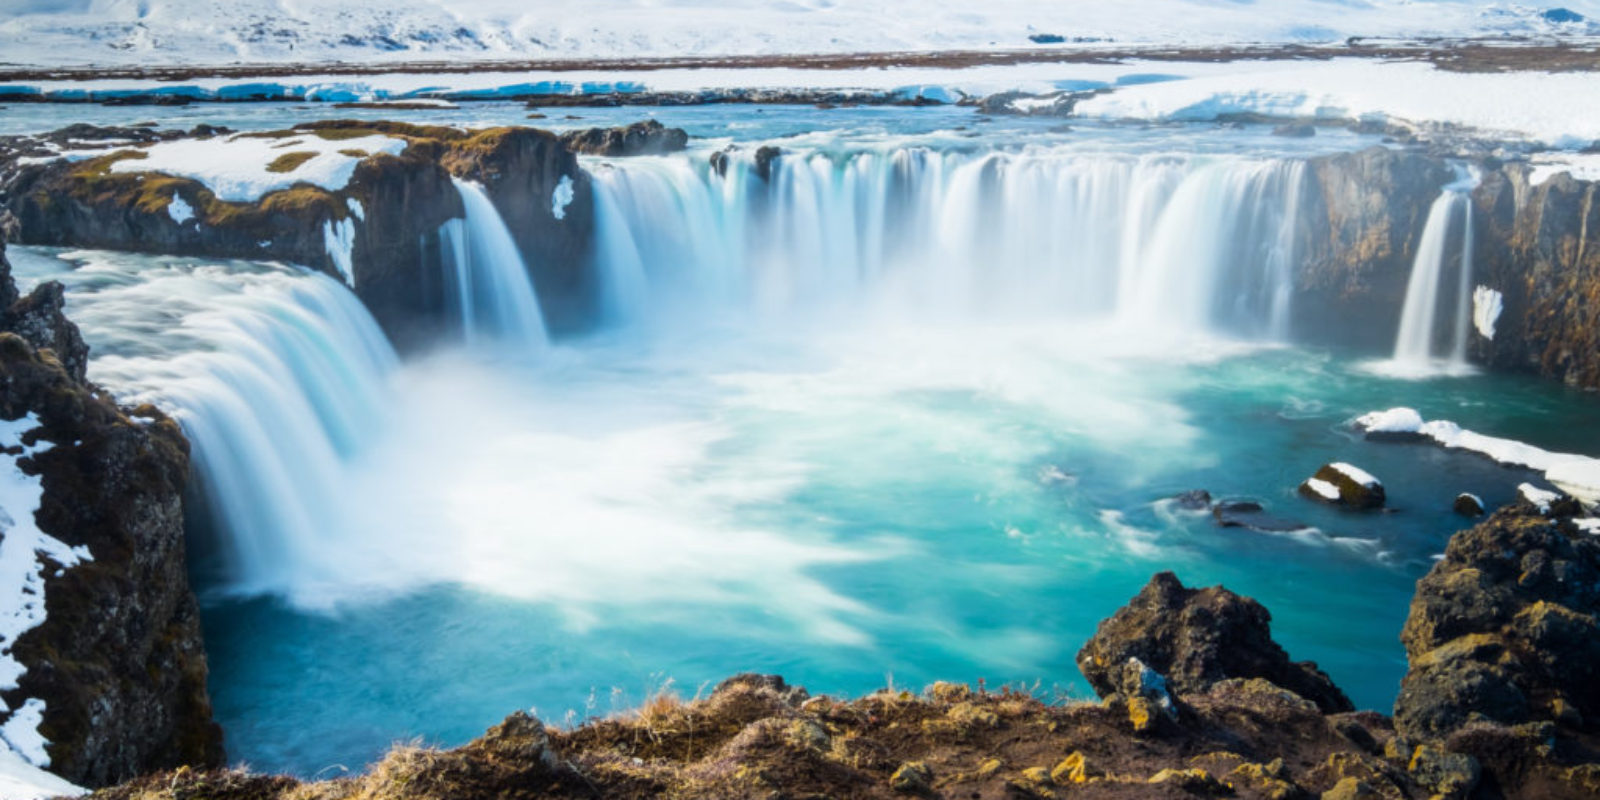 Iceland is high on many people's bucket list. It's got adventure, nature, wildlife, and luxury all rolled into one tiny (ok, 18th largest) island. Did you..